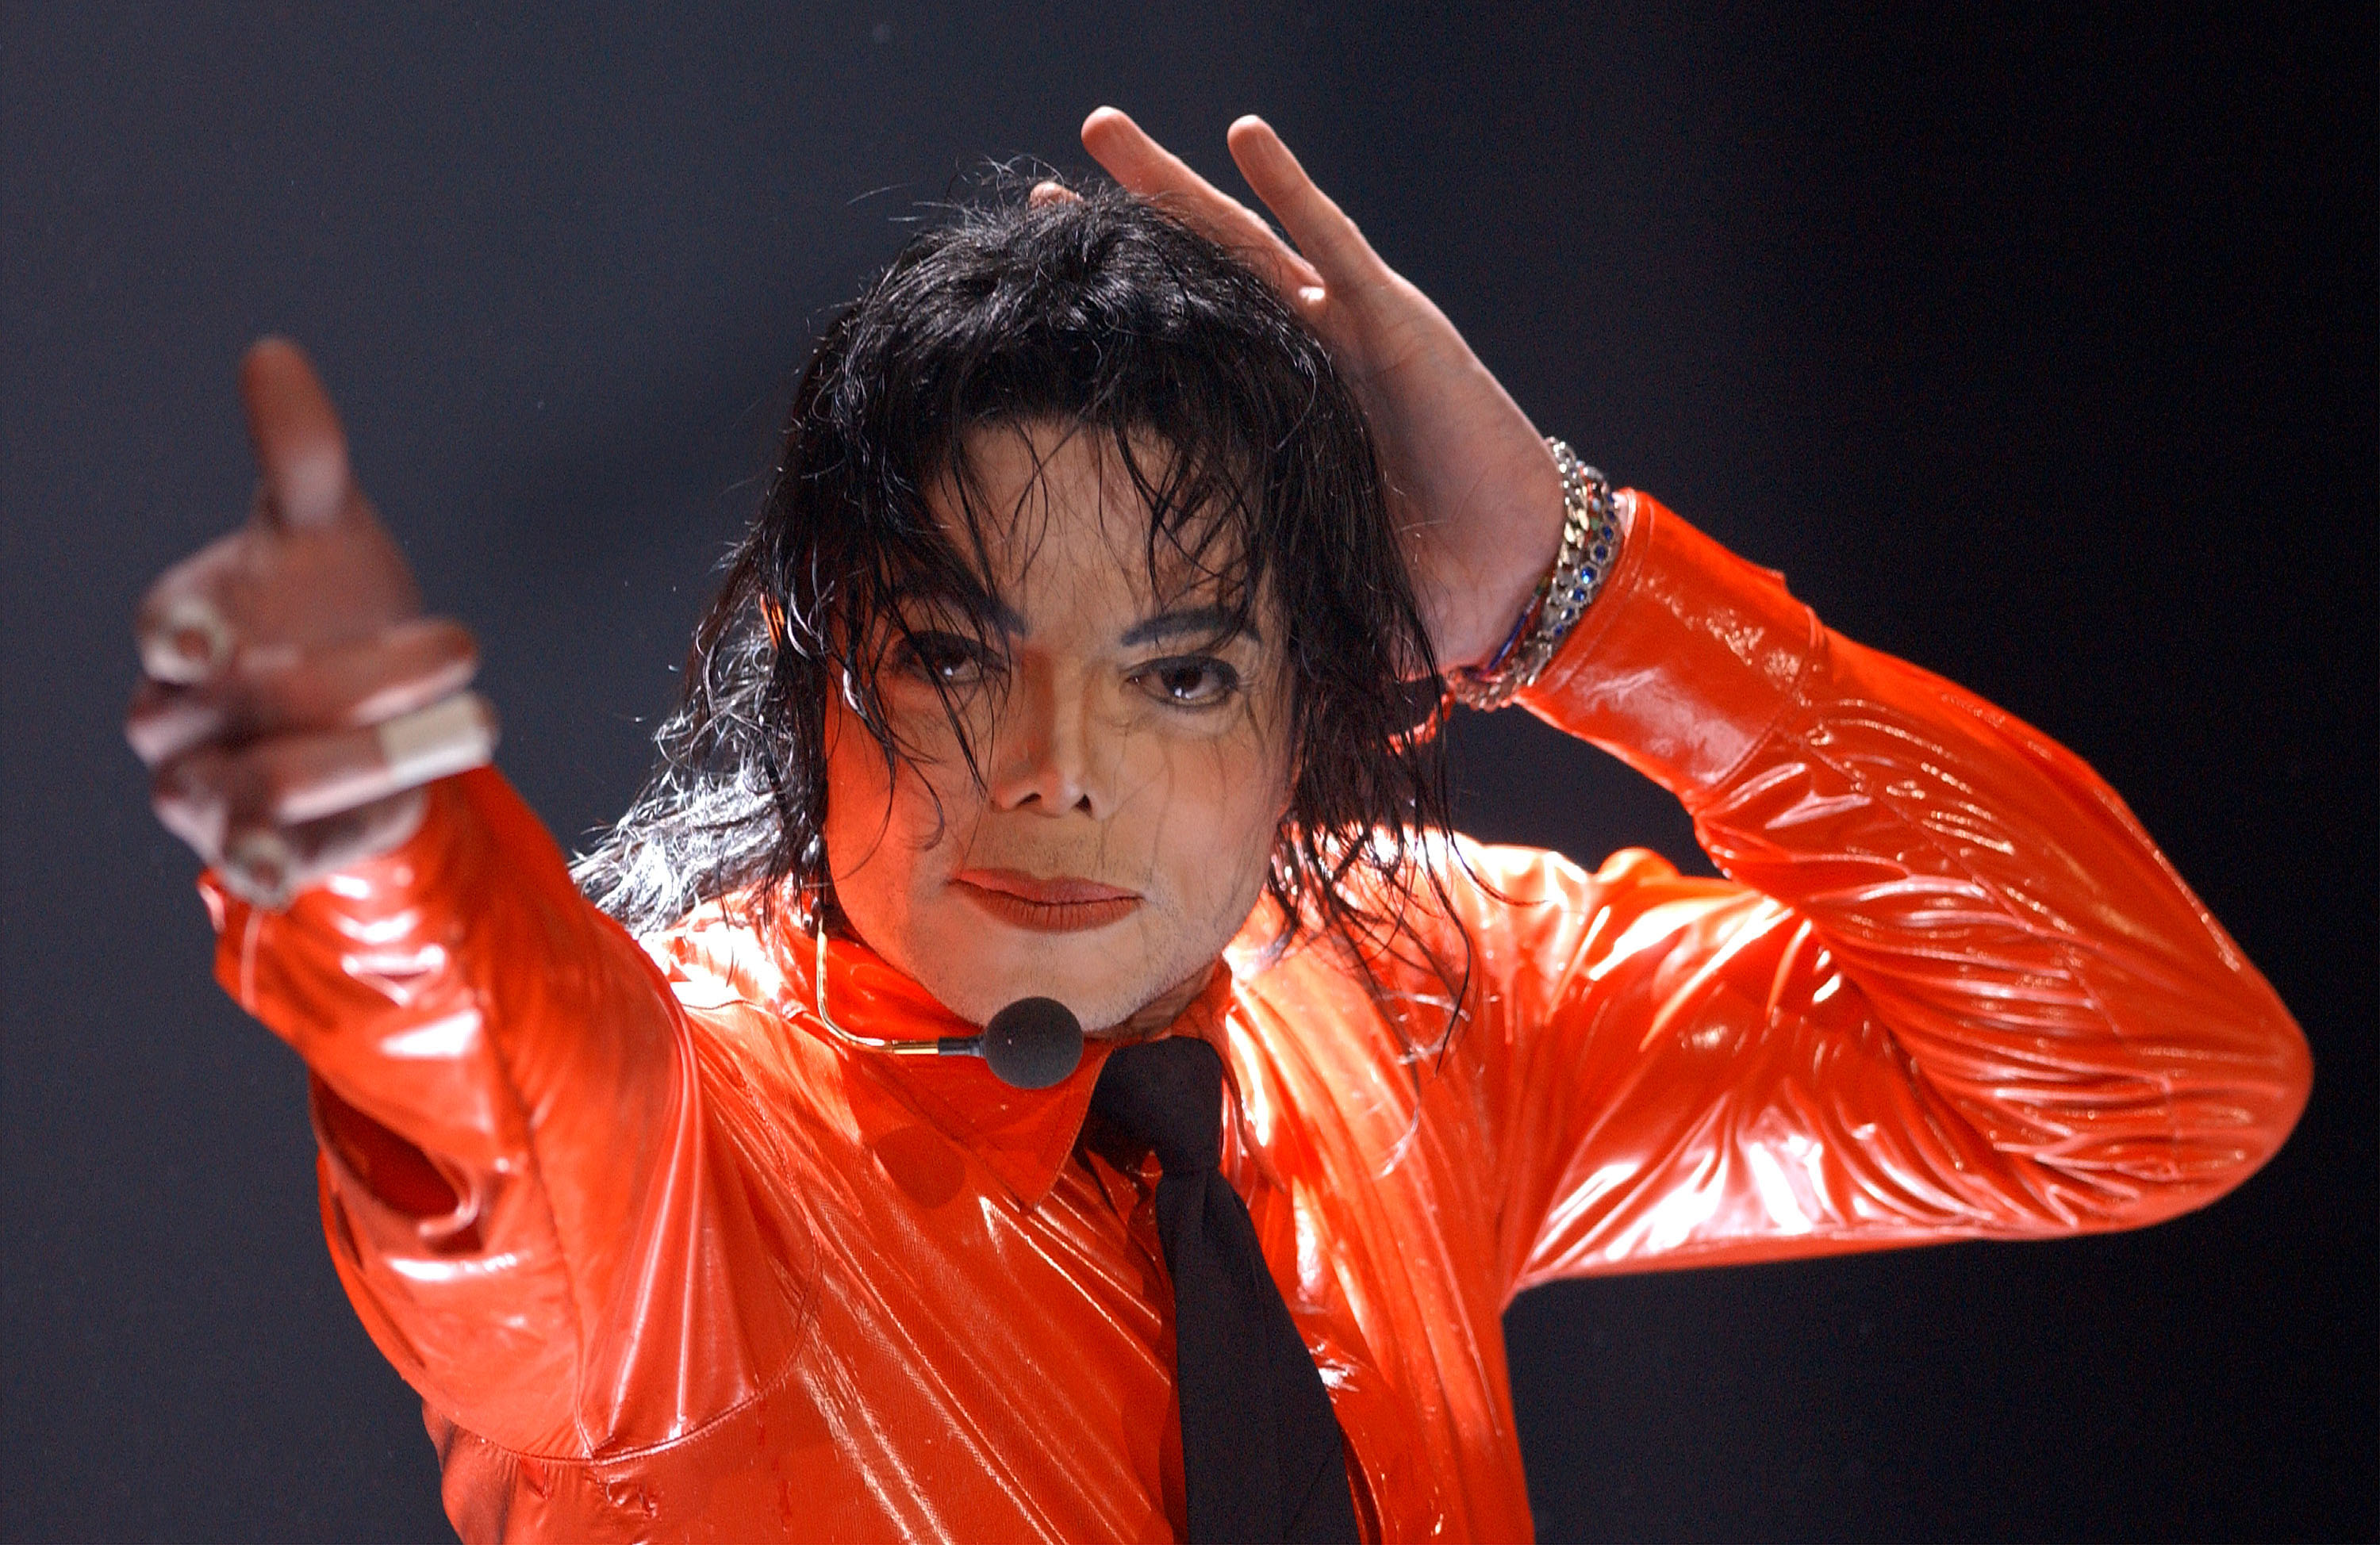 Michael Jackson performing at the American Bandstand's 50th Celebration in Los Angeles in 2002 | Source: Getty Images